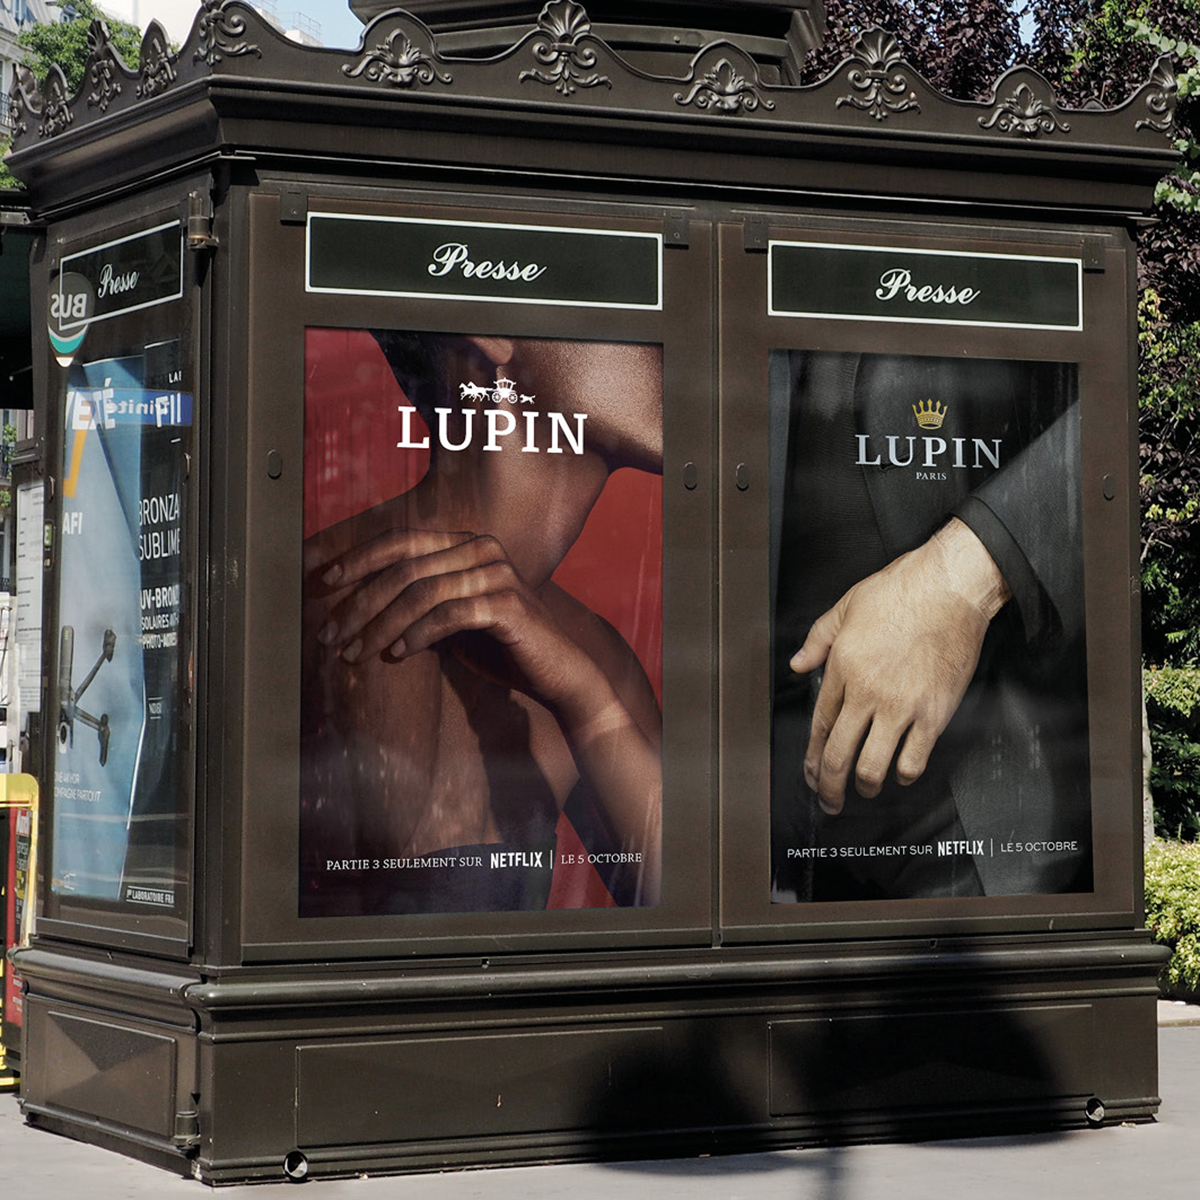 Netflix Lupin - The Missing Jewels - Outdoor Campaign